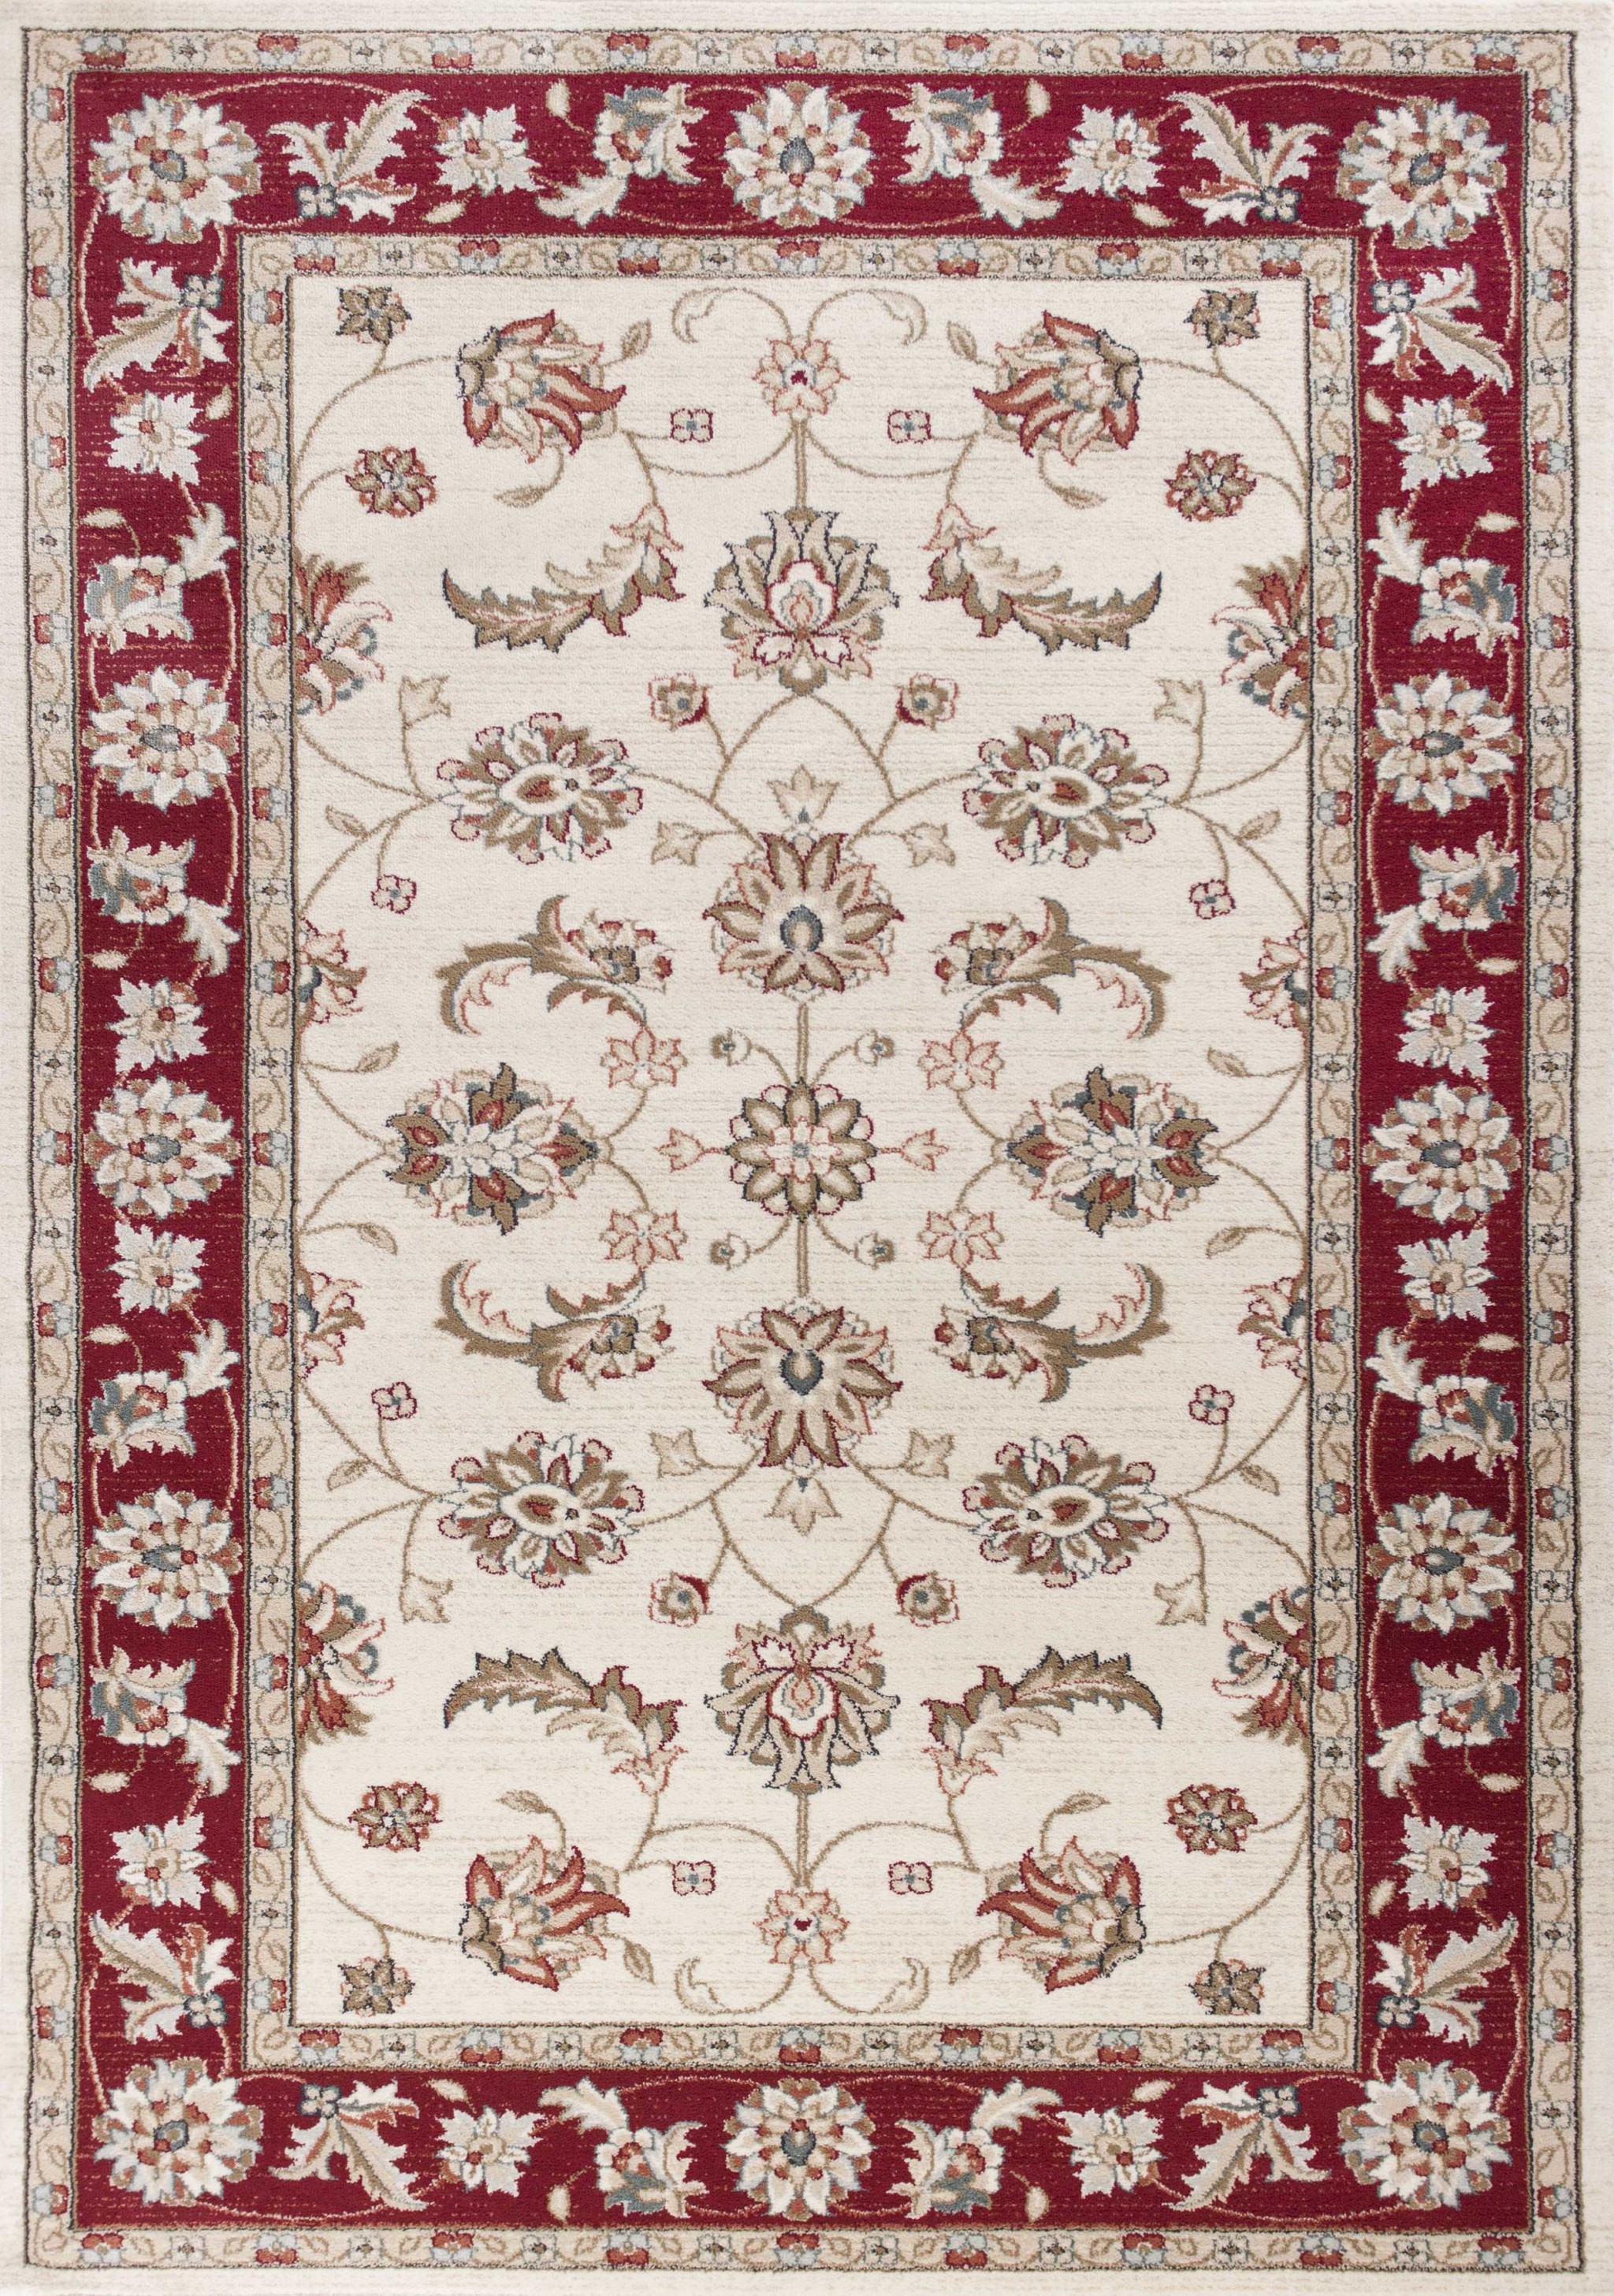 3'X5' Ivory Red Floral Indoor Area Rug-353463-1